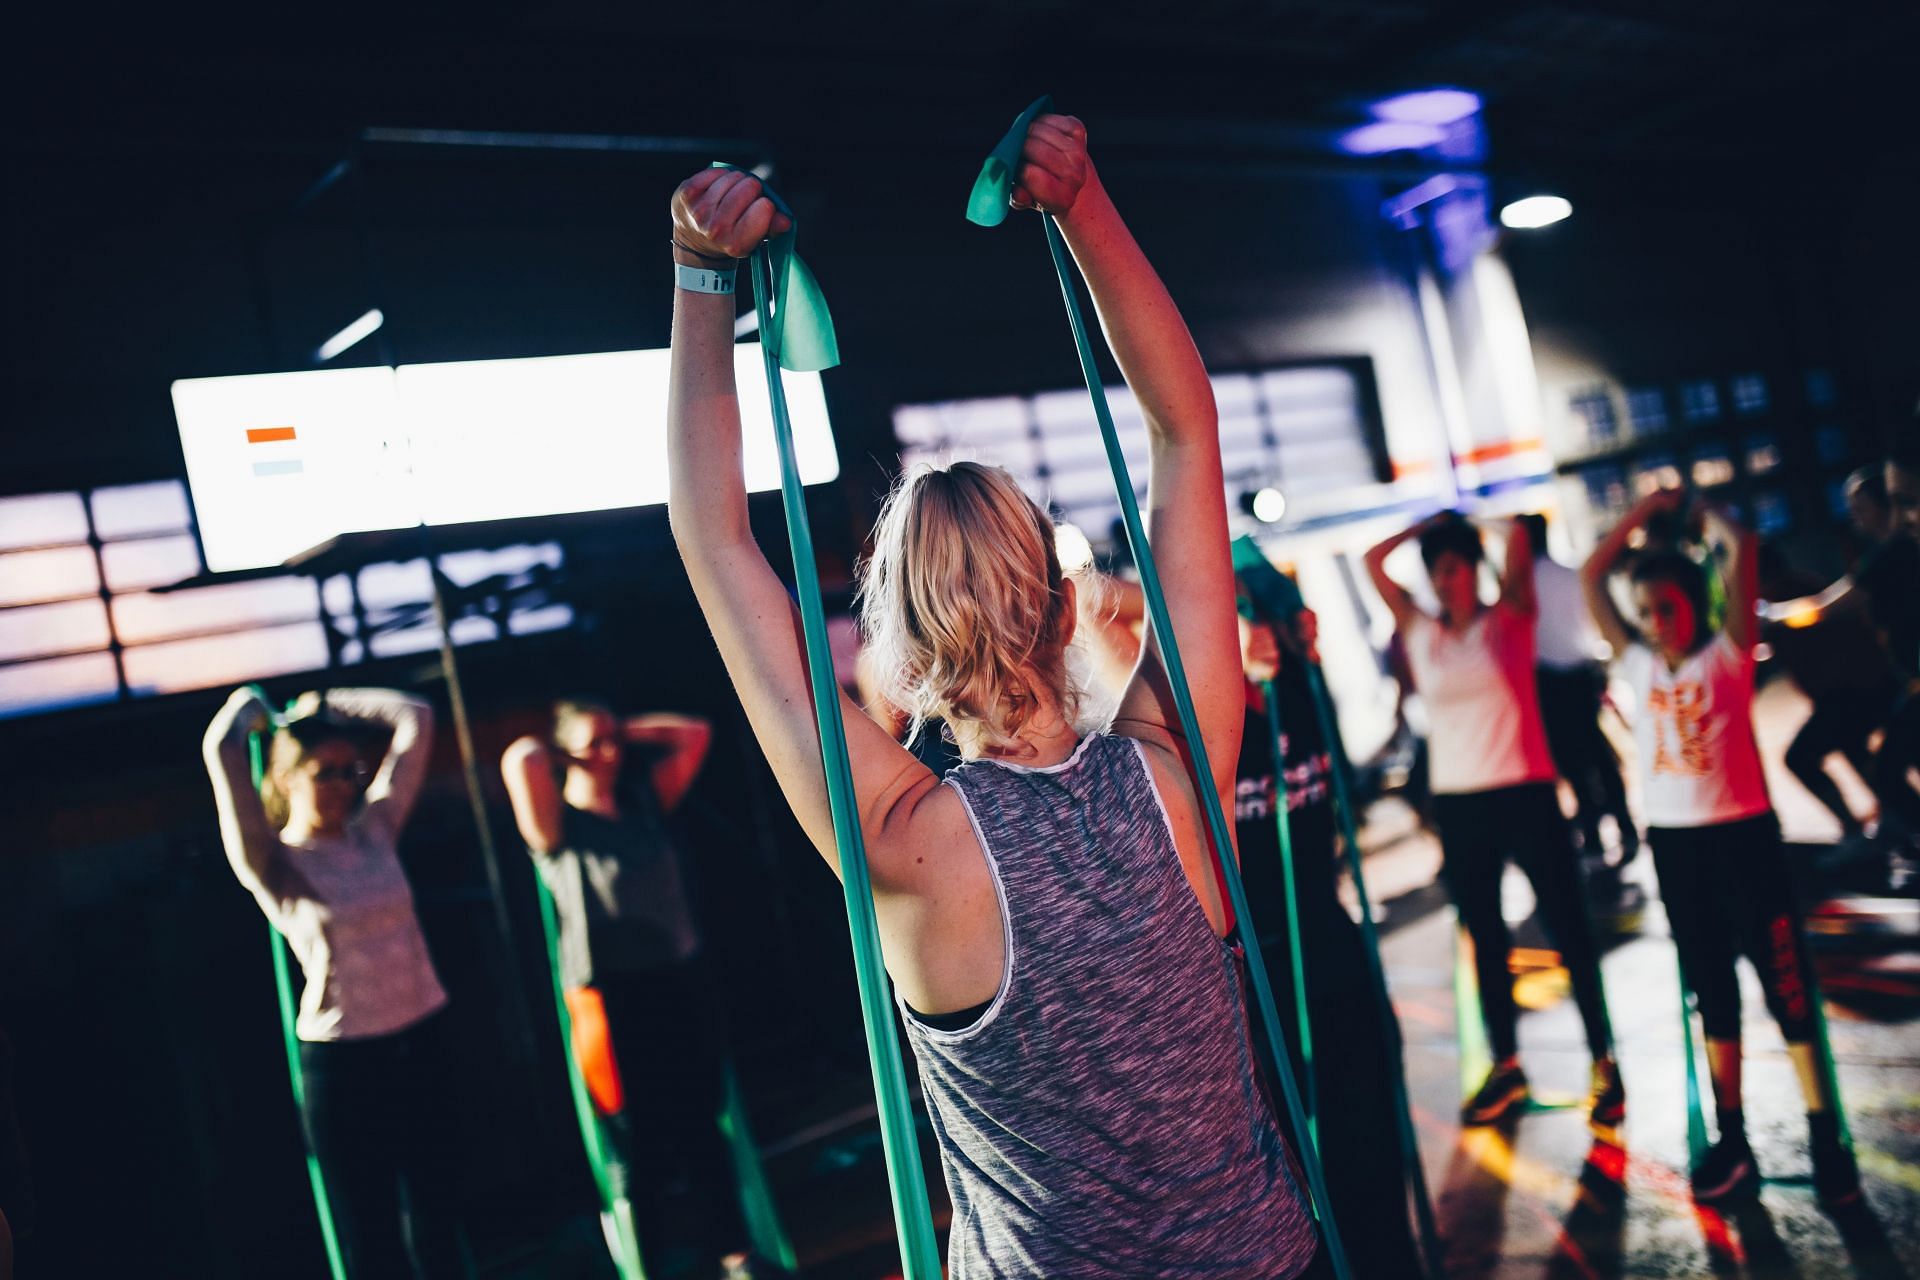 We Tried an Intense Cardio Workout at Orangetheory Fitness